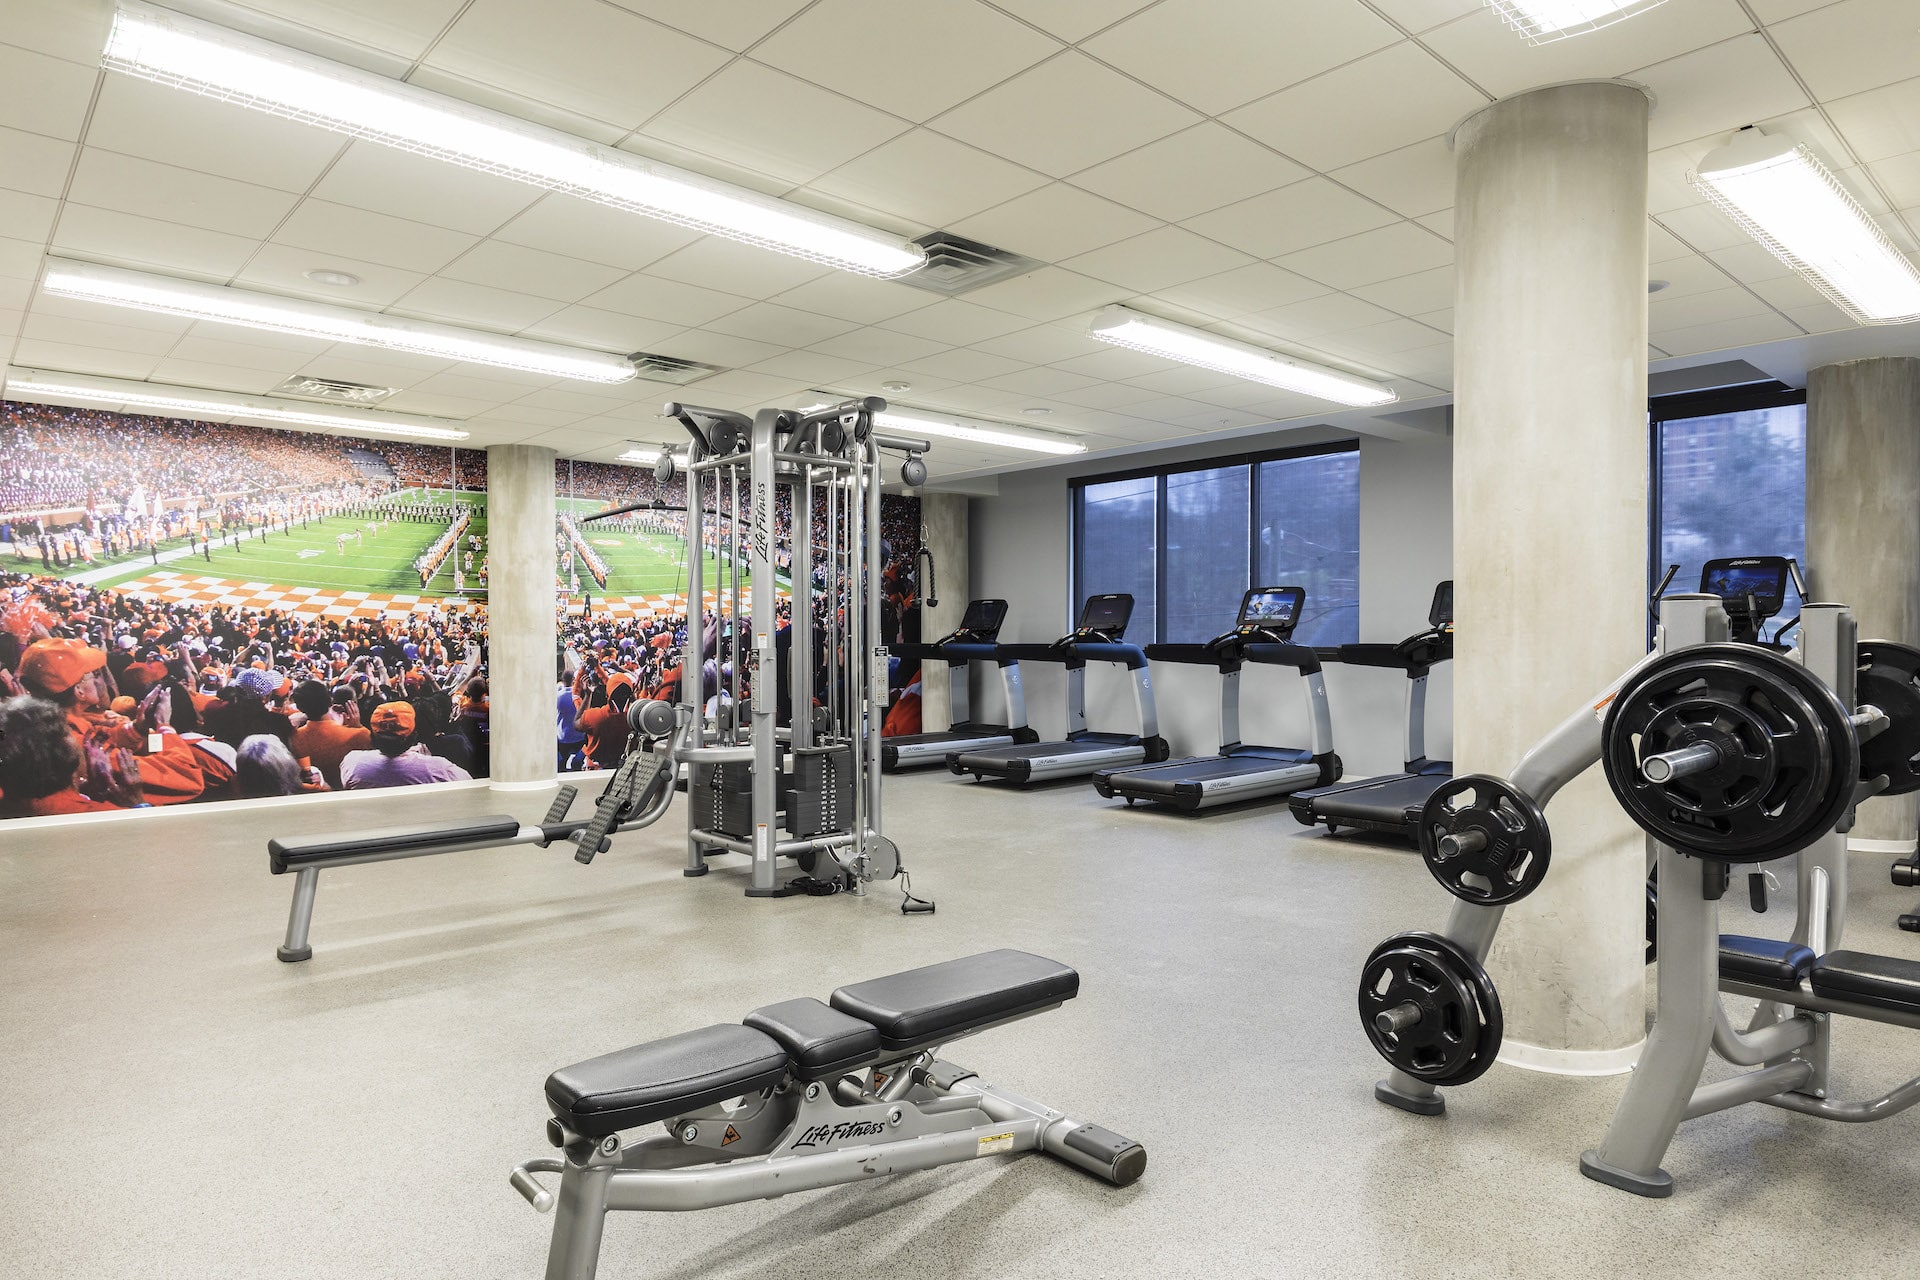 Fitness room with weight lifting equipment, treadmills, and bench